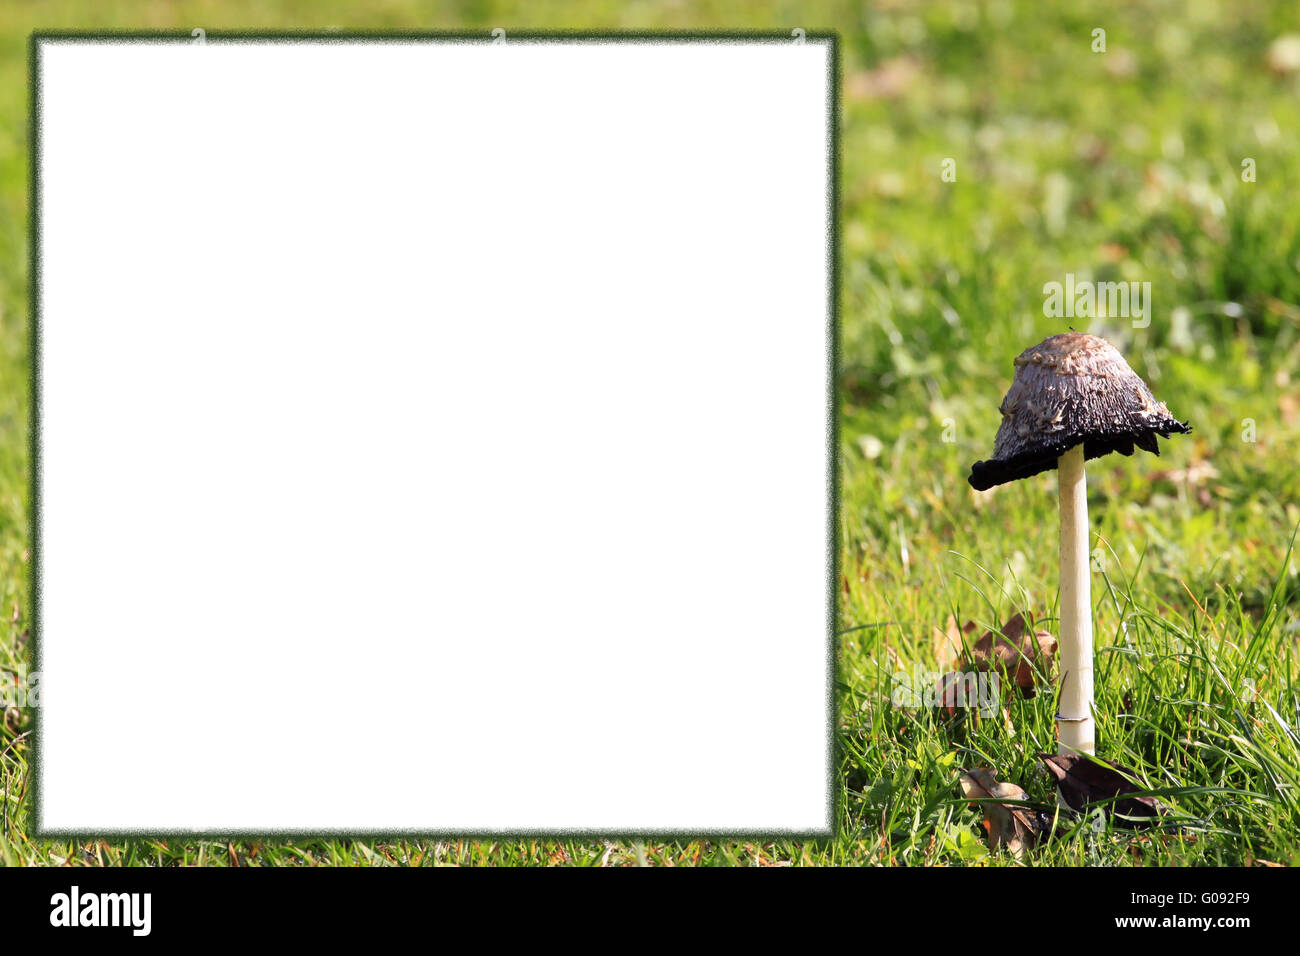 Mushroom frame with copy space for own text Stock Photo